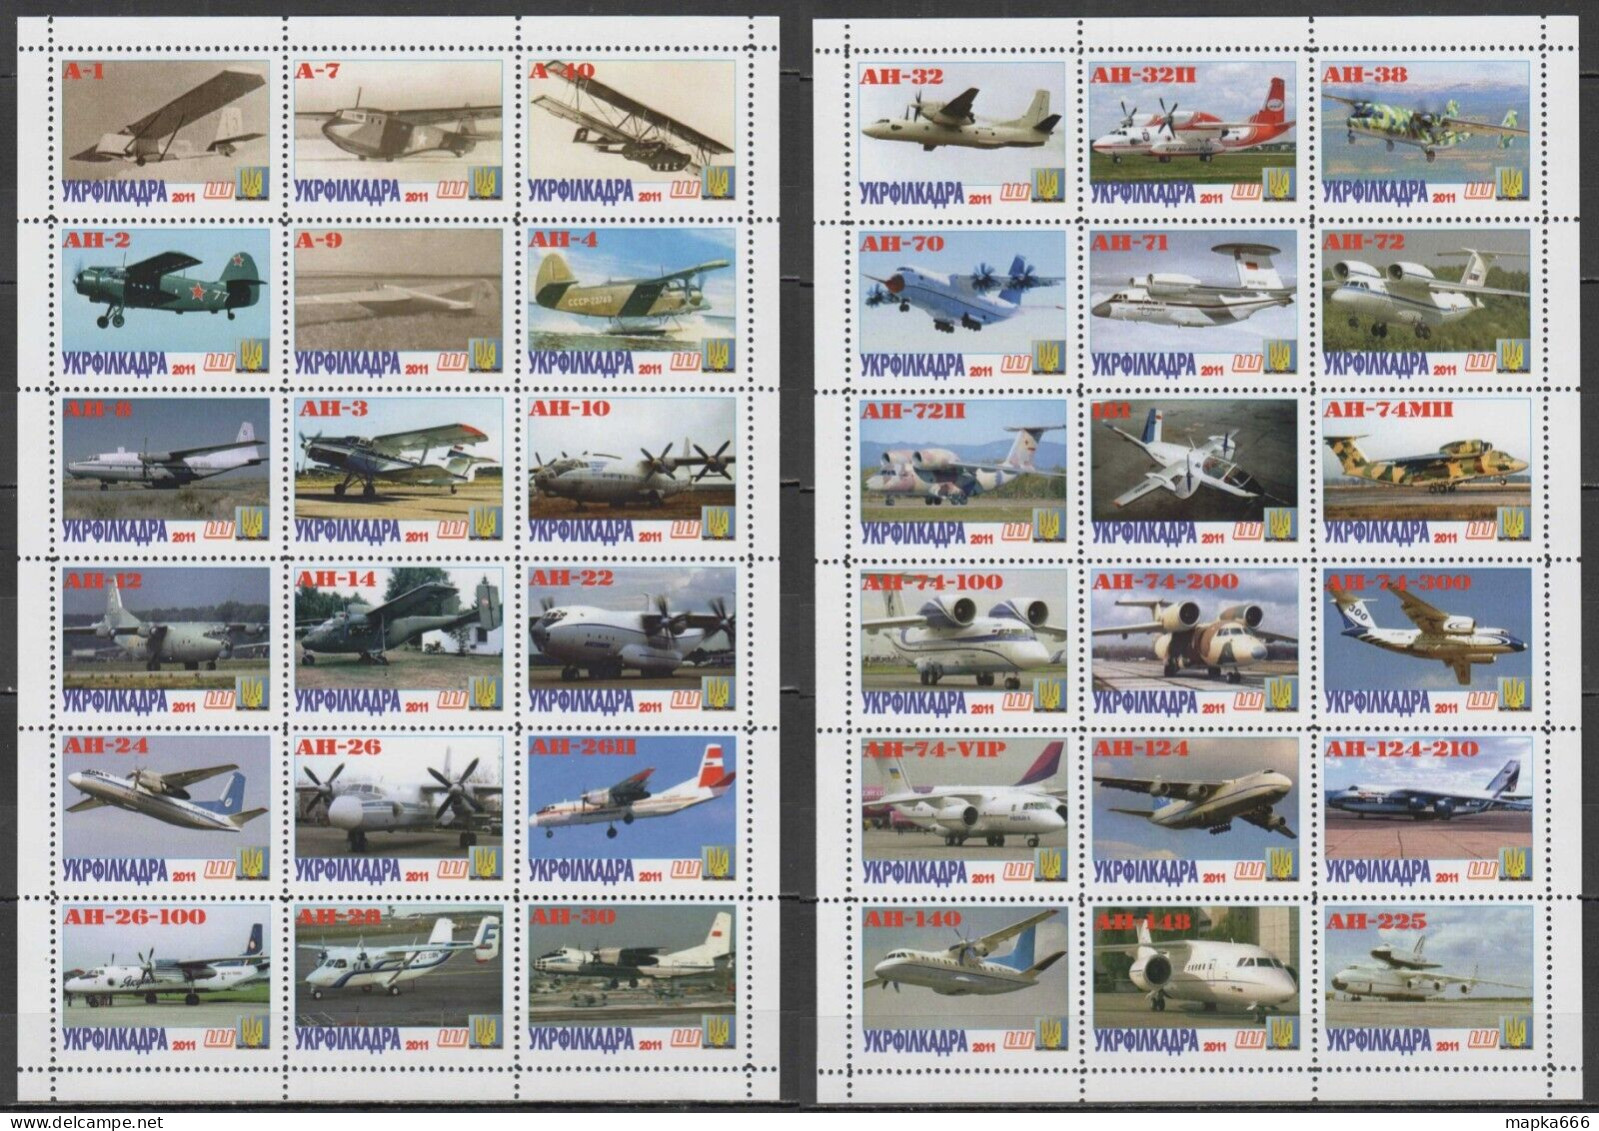 Eb178 2011-2014 Aircrafts Airplanes Fighters 20Th Century Military War 17Sh Mnh - Militaria